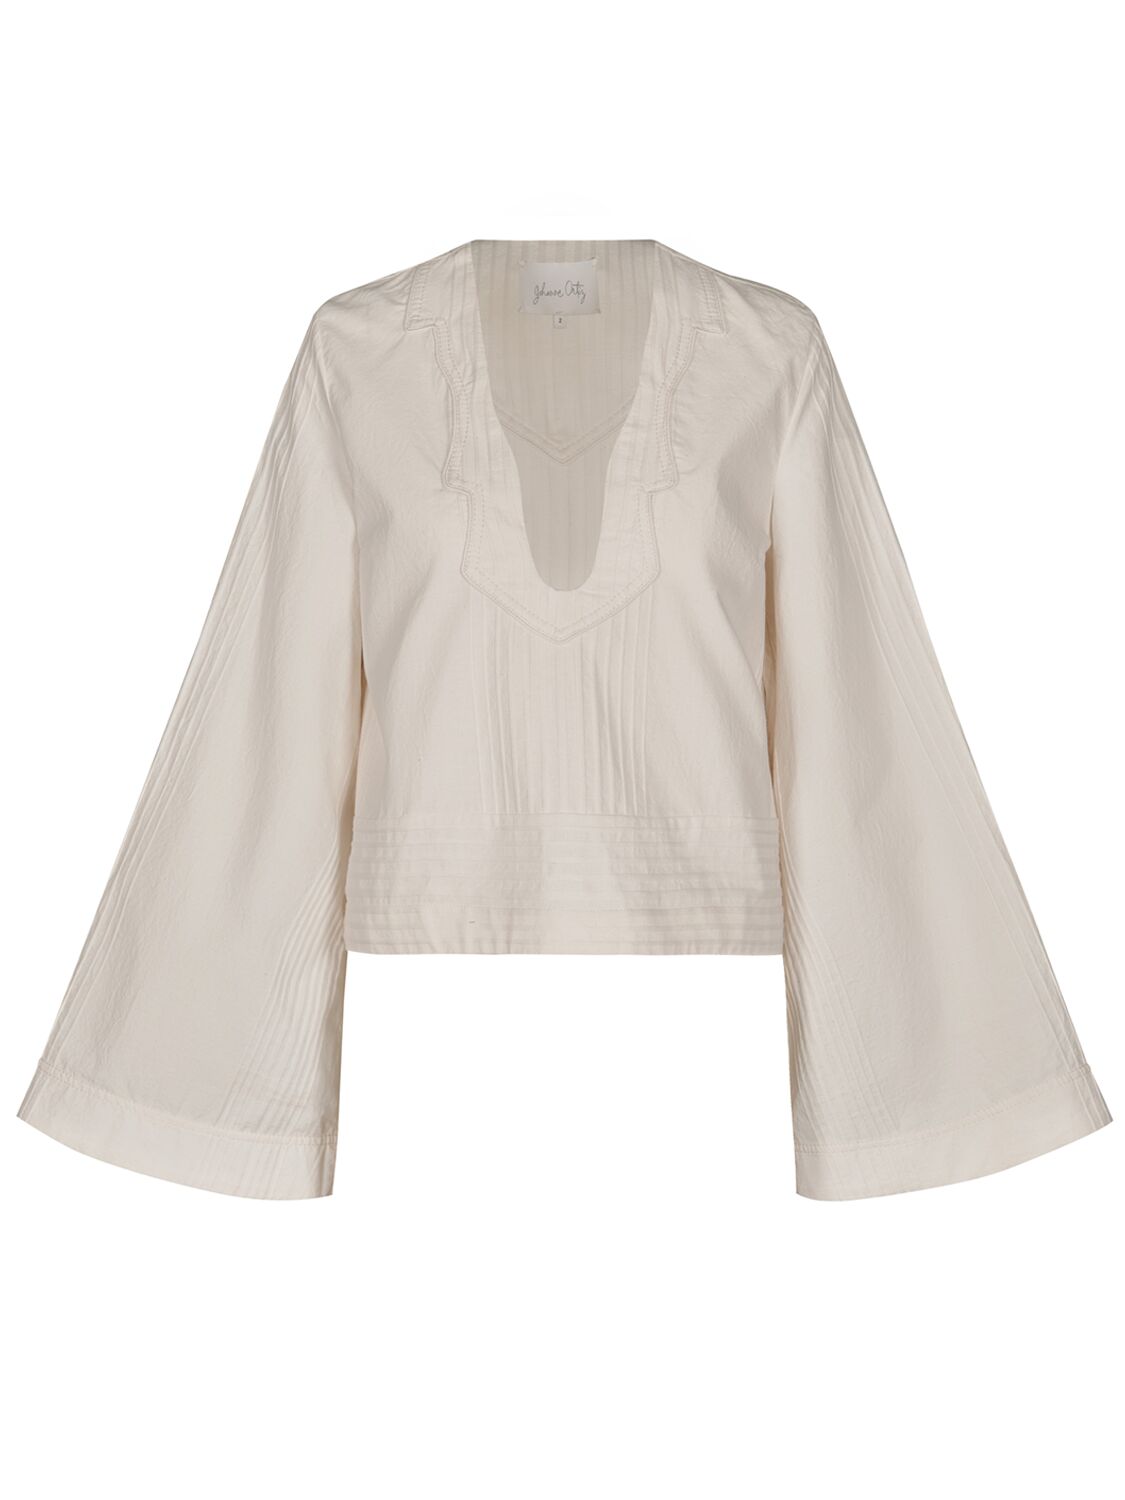 Johanna Ortiz Embroidered Cotton Flared Sleeve Top In Ivory